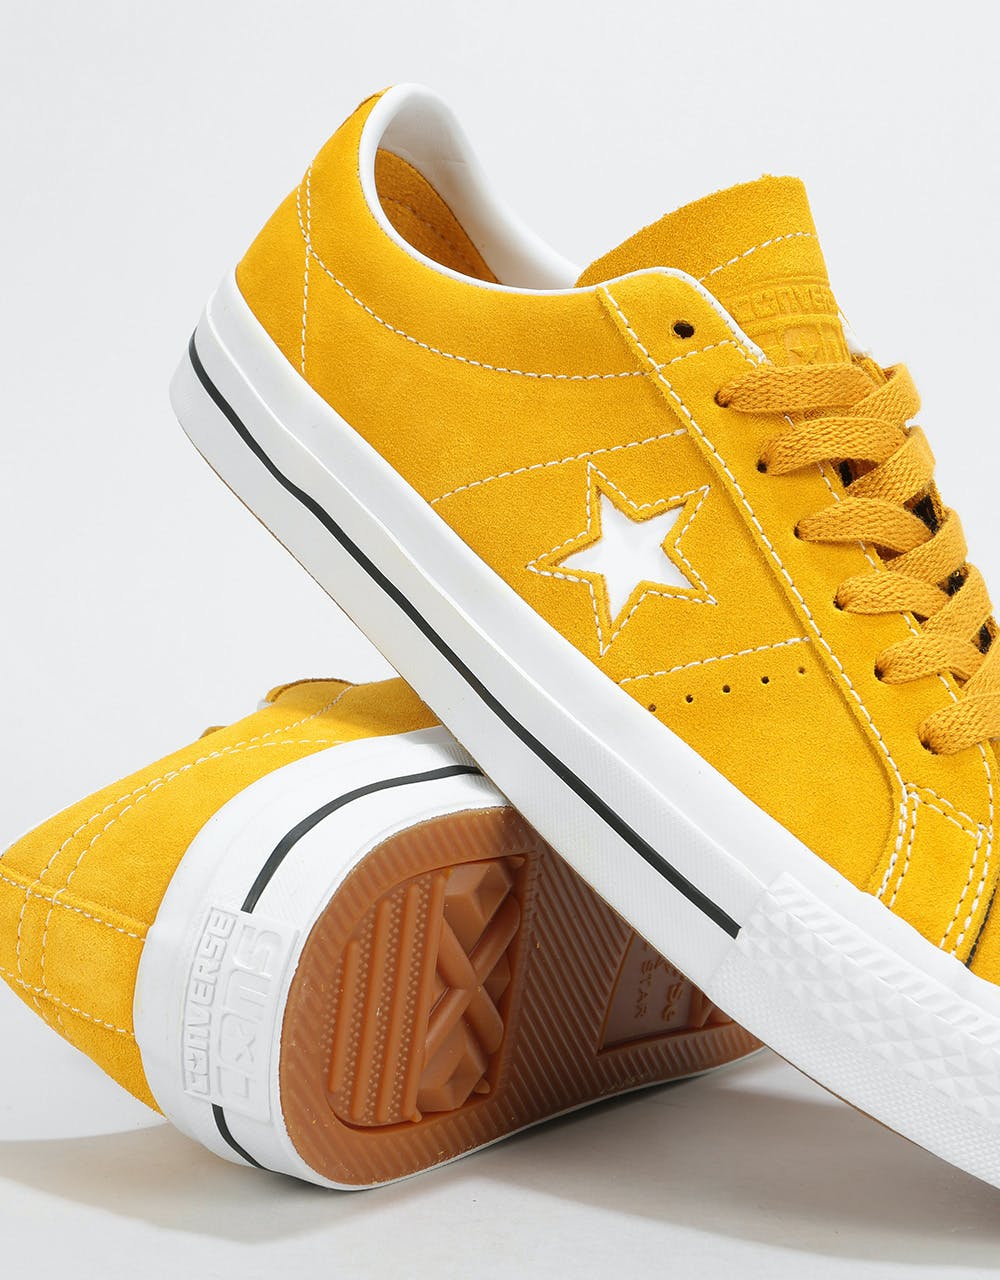 Converse One Star Pro Ox Skate Shoes - Mineral Yellow/White/Black